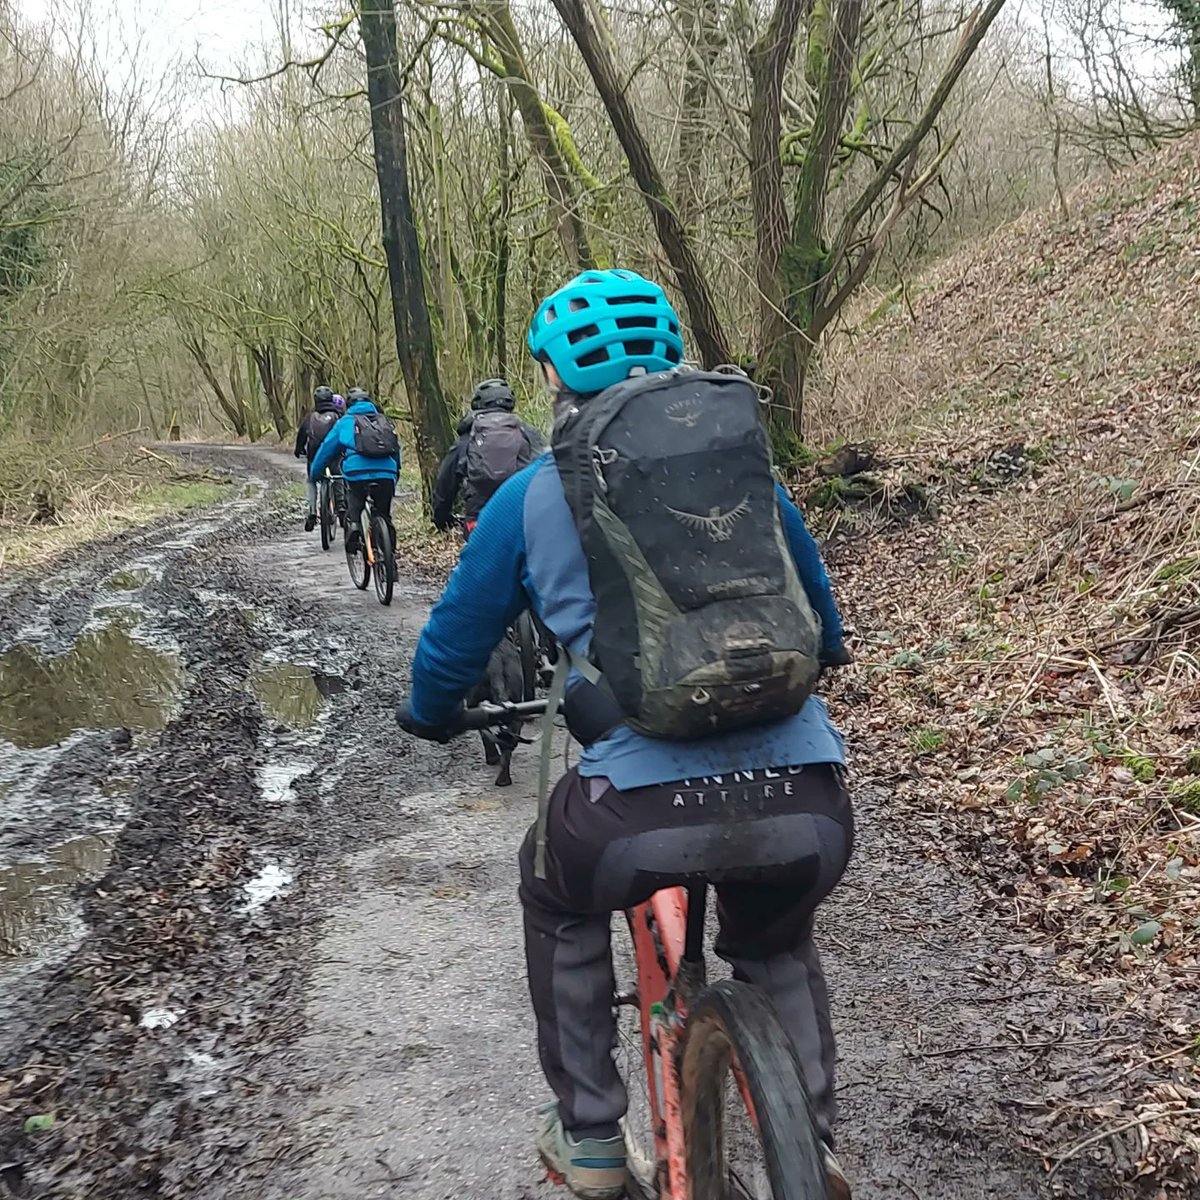 Fantastic day with our #peakconnections group on day 2 of their Miasuk Martin Nash mbl 1/2 course. Thanks @Ginnyallende for leading. @BritishCycling #cycleandstride @BeeNetwork @CyclingUK_NW #onelesscar #activetravel #placestoride #reducinganxiety #outdoorleadership @TNLComFund